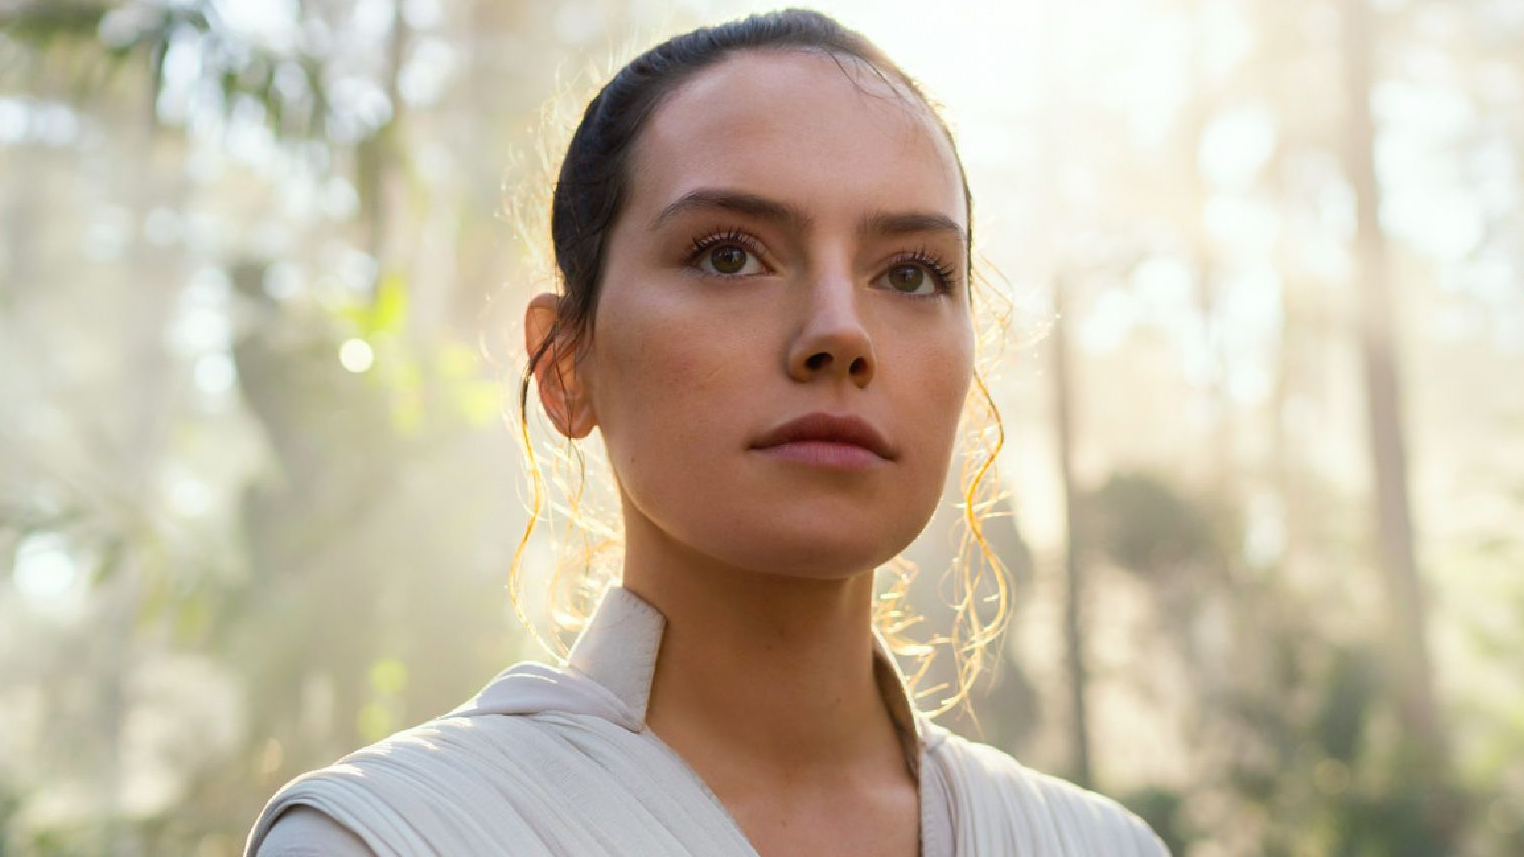 Star Wars Being Completely Rebooted Using Grogu And Daisy Ridley?